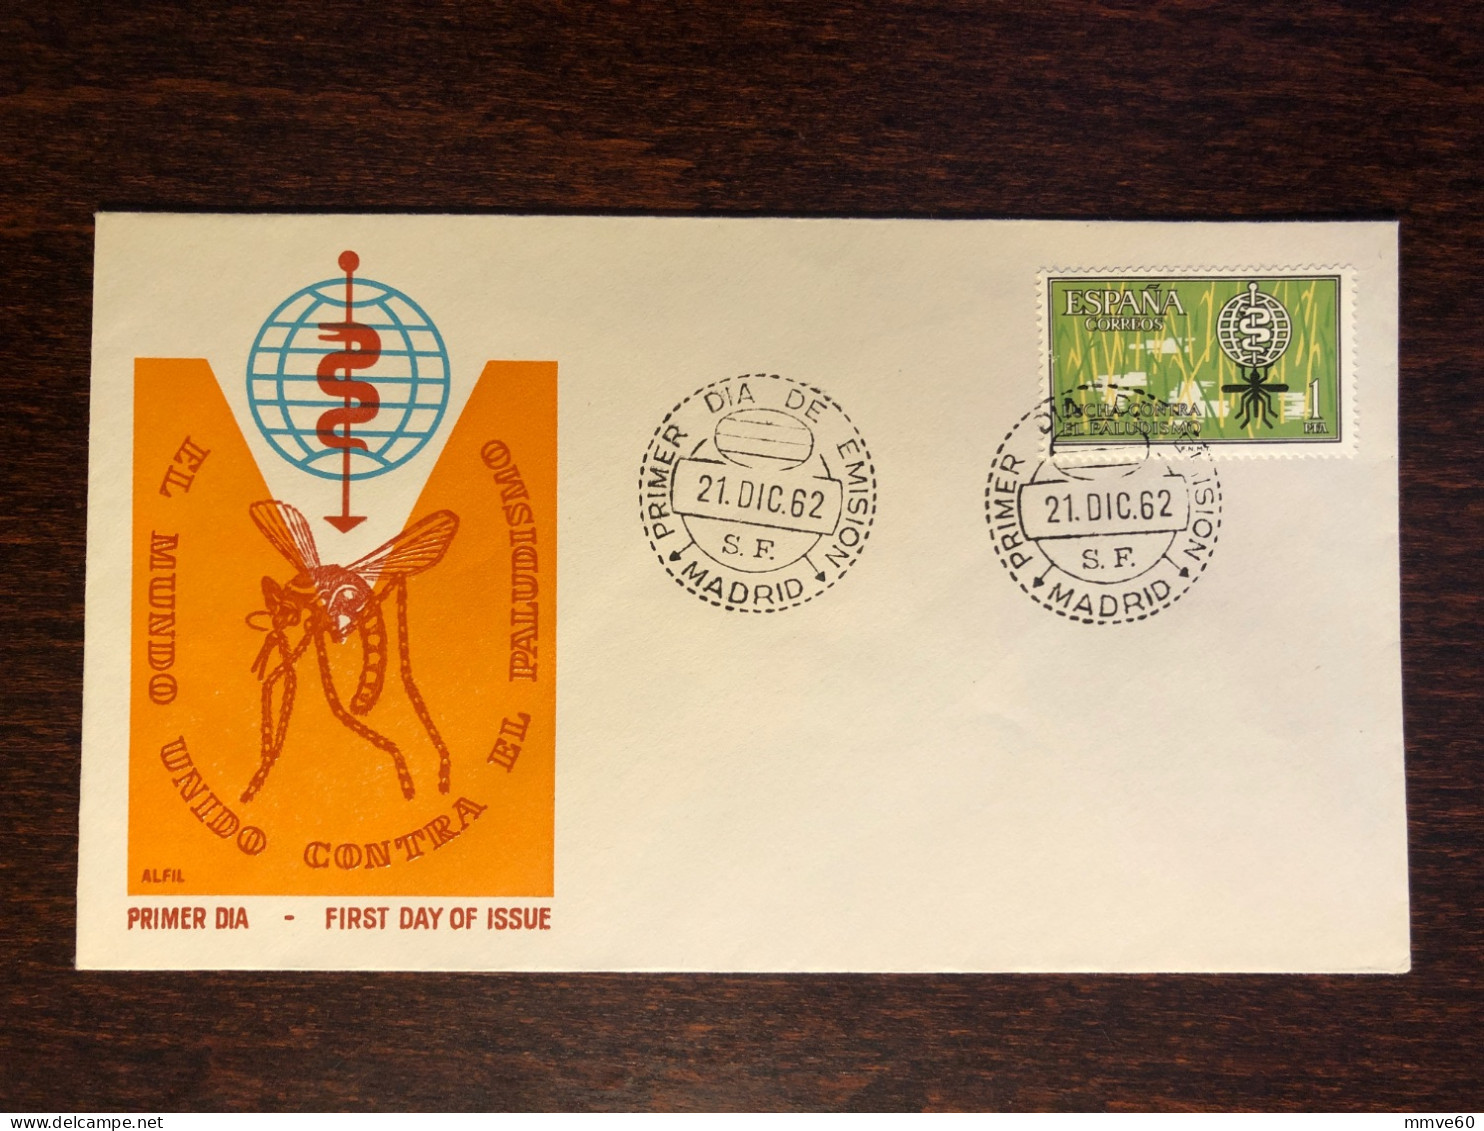 SPAIN FDC COVER 1962 YEAR MALARIA HEALTH MEDICINE STAMPS - FDC